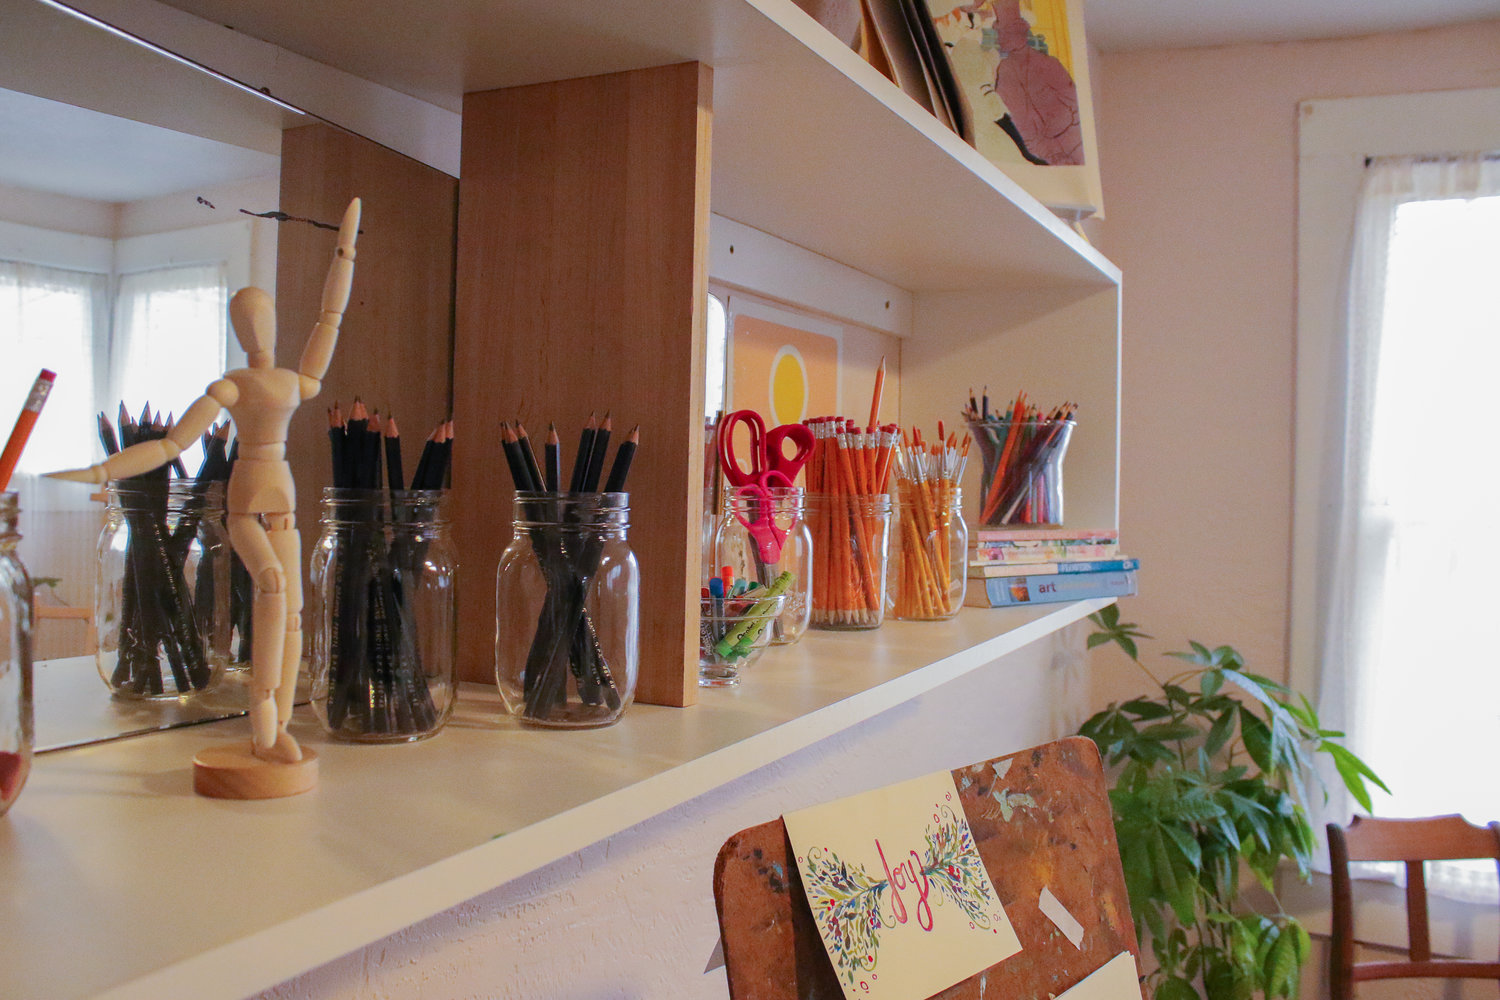 The many rooms at Dandelion Creative Space are stocked with every supply an artist could ever need.